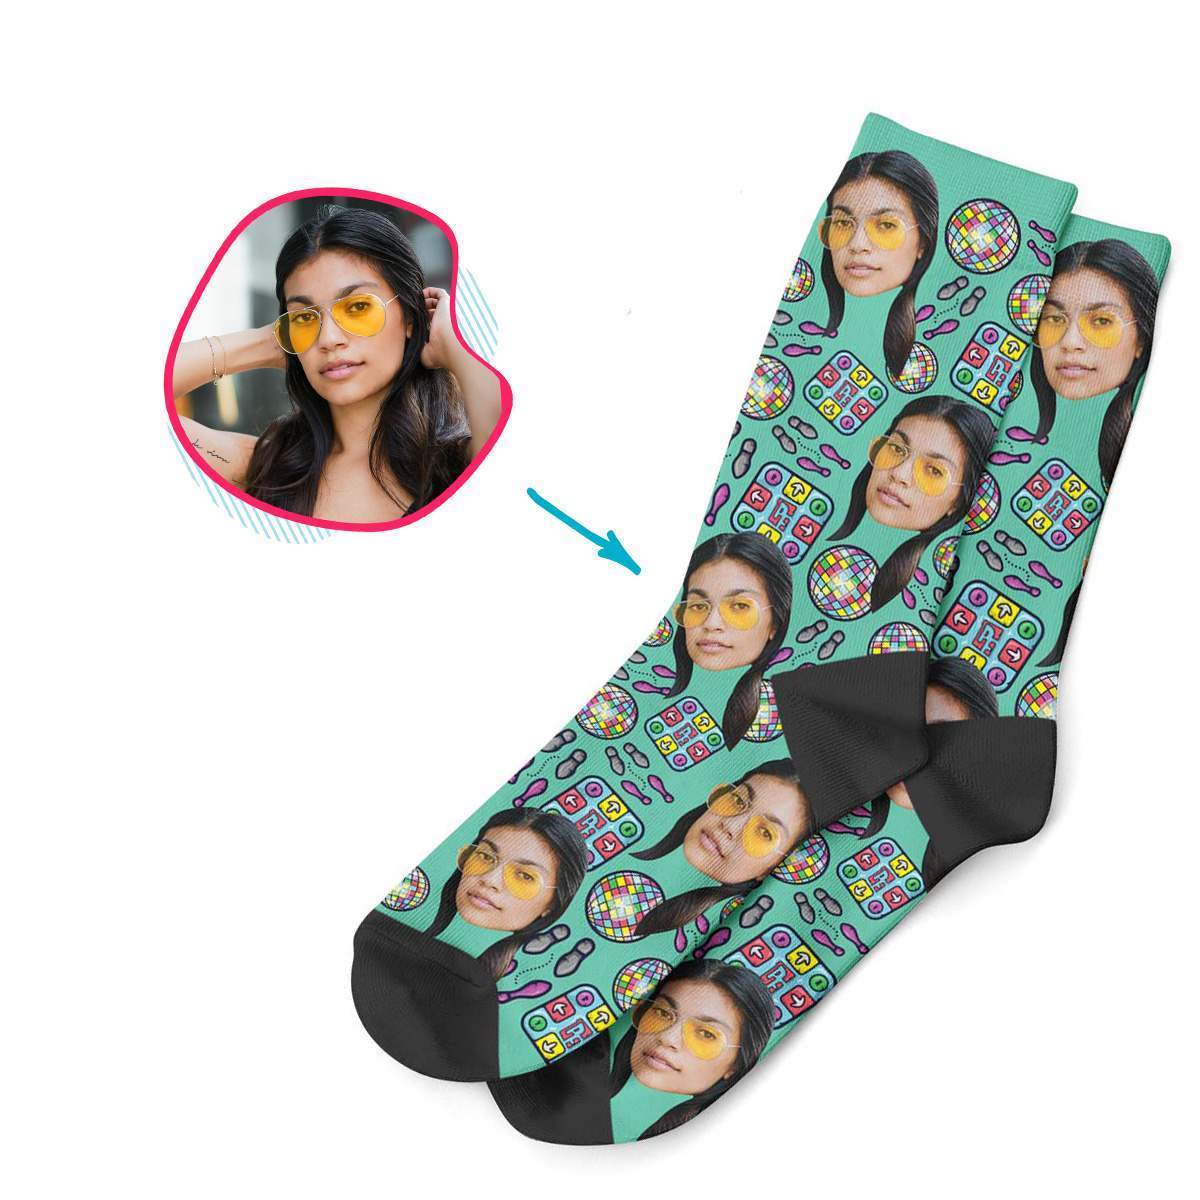 mint Dancing socks personalized with photo of face printed on them